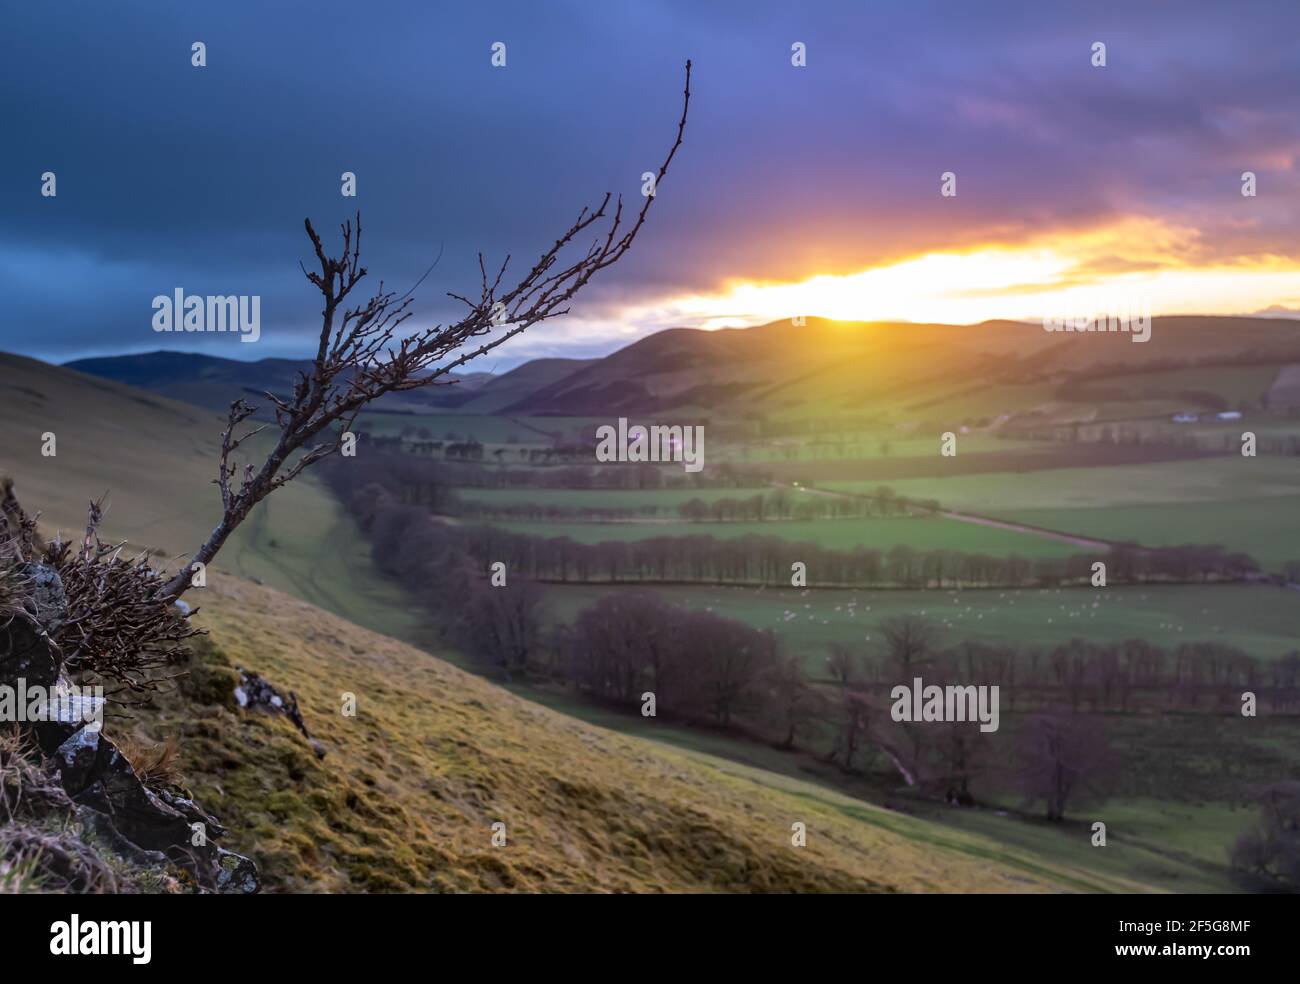 A Beam Of Light From A Winter Sunset Illuminating The Gentle Landscape Of An Agricultural Valley In The Scottish Borders, With Atmospheric Soft Focus Stock Photo